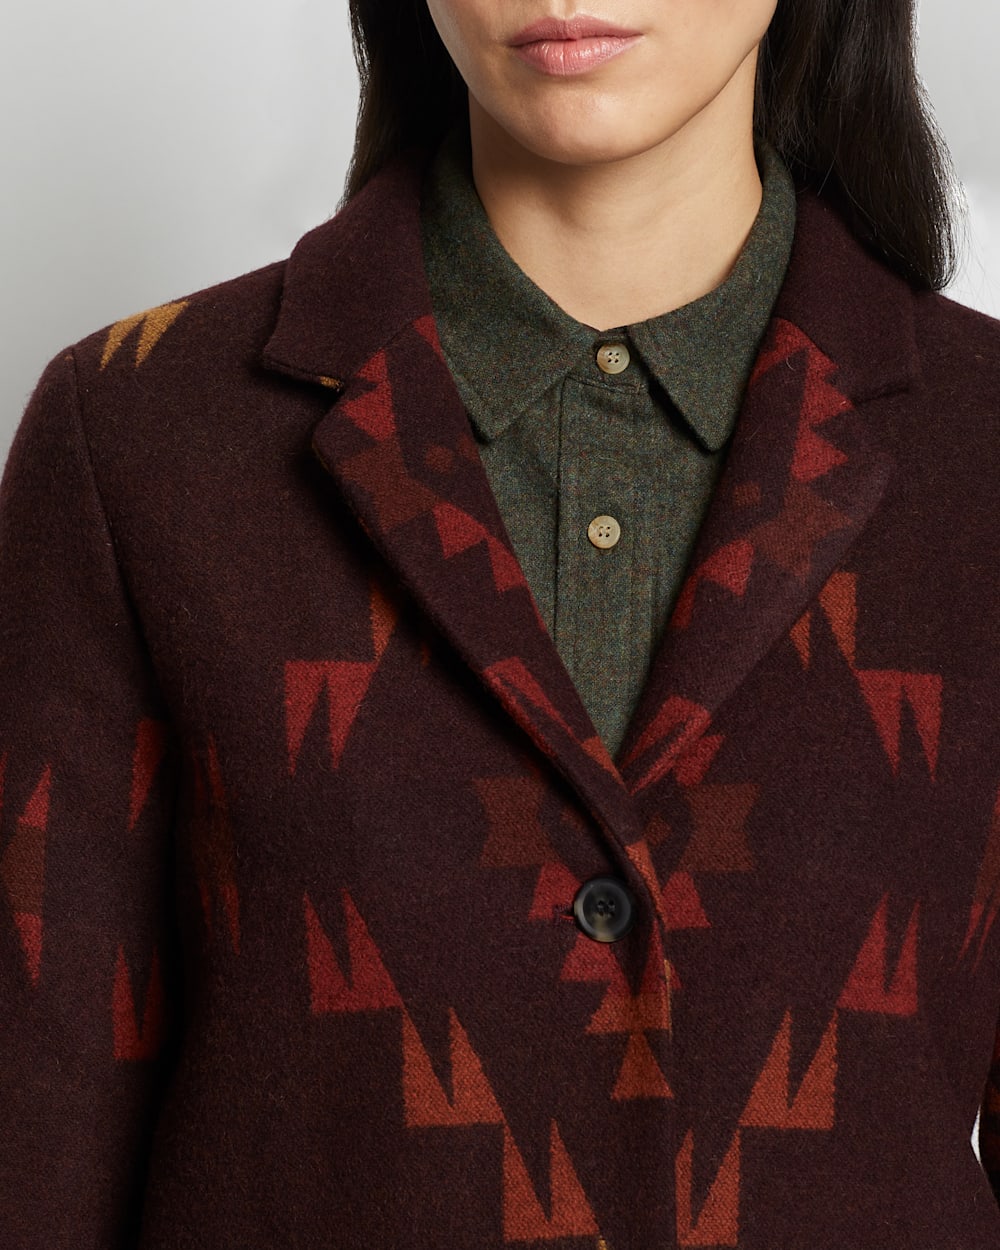 ALTERNATE VIEW OF WOMEN'S JACKSONVILLE WOOL COAT IN CABERNET MISSION TRAILS image number 4